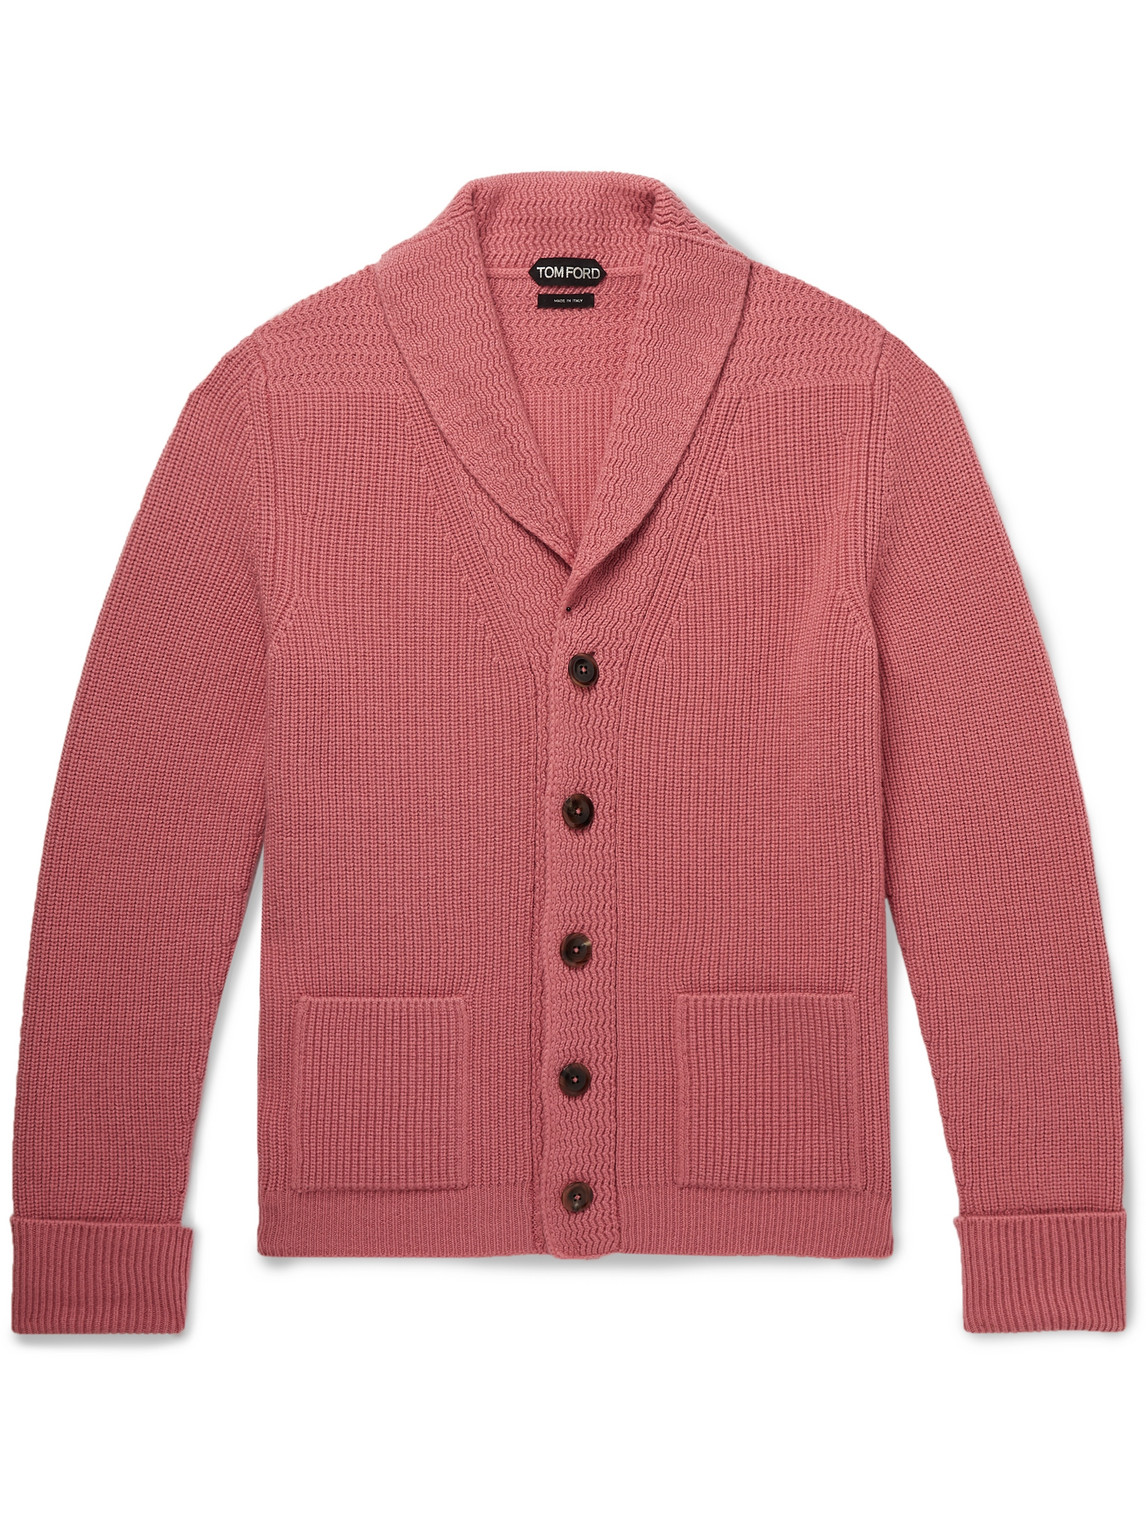 Tom Ford Ribbed Cashmere Cardigan In Pink